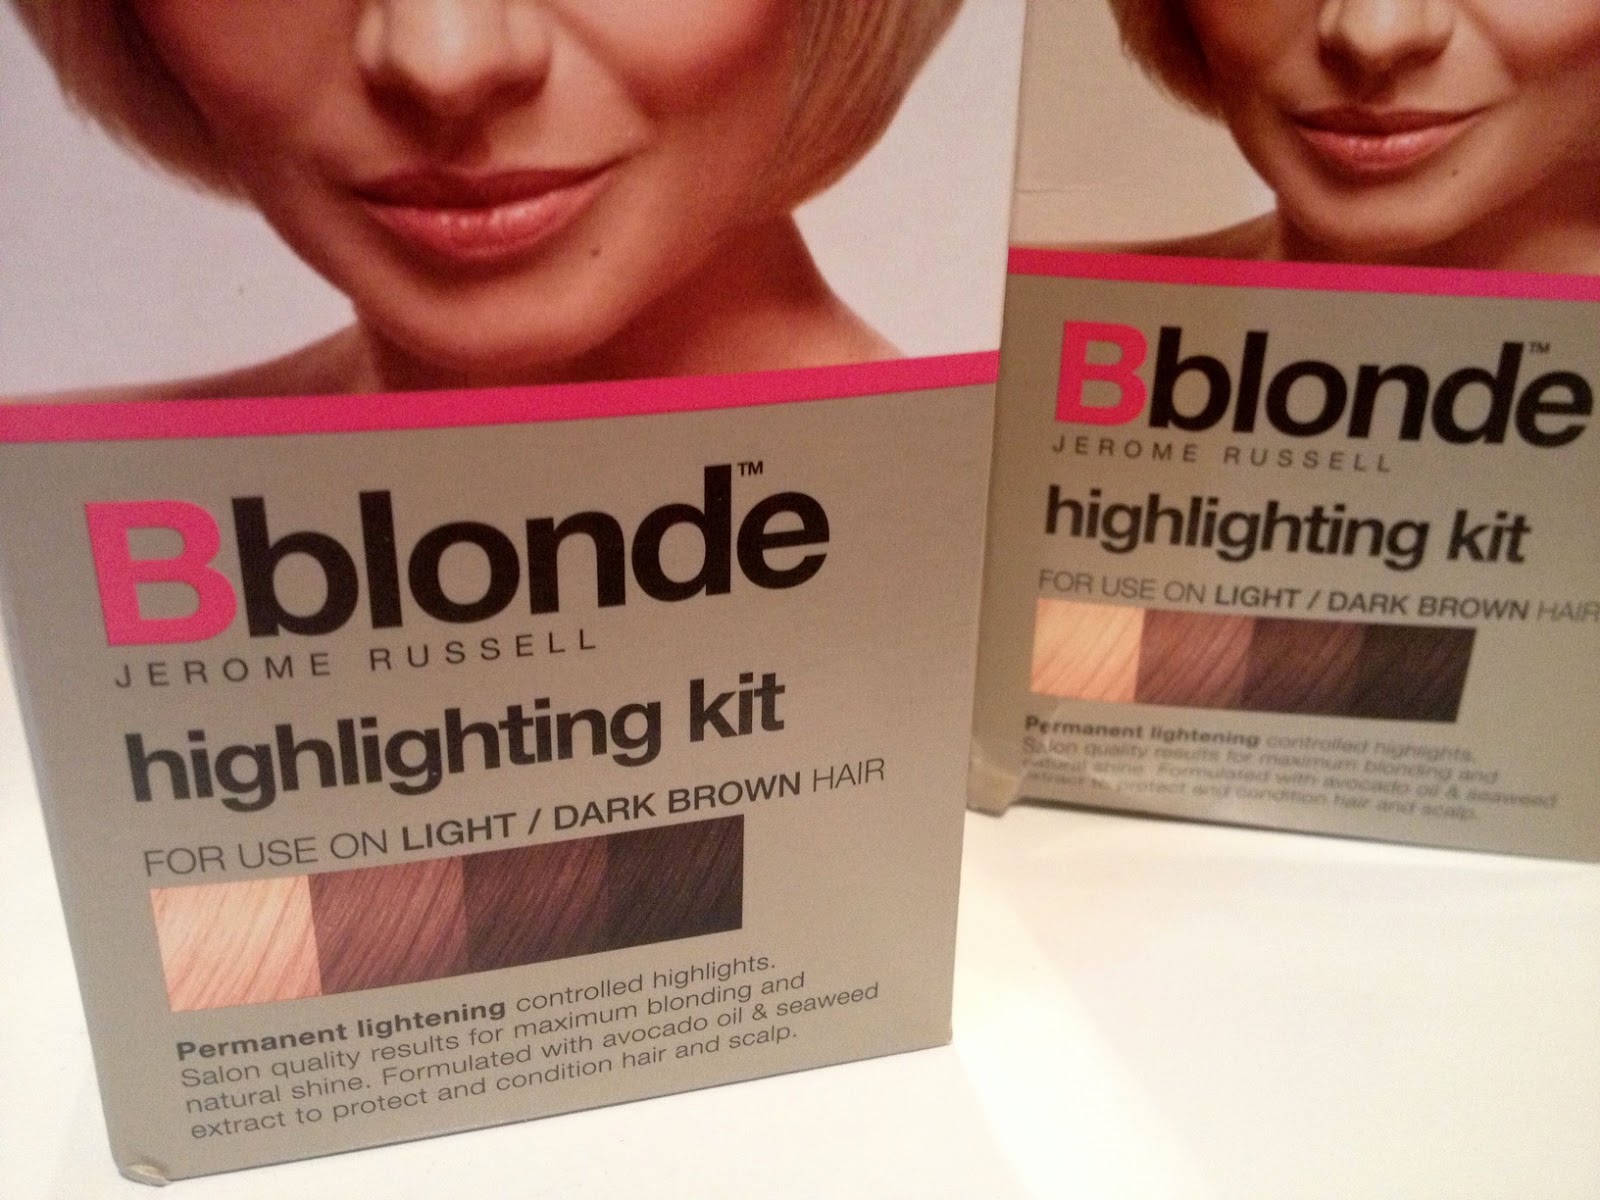 Jerome Russell Bblonde Highlighting Kit for Darker Hair - wide 6